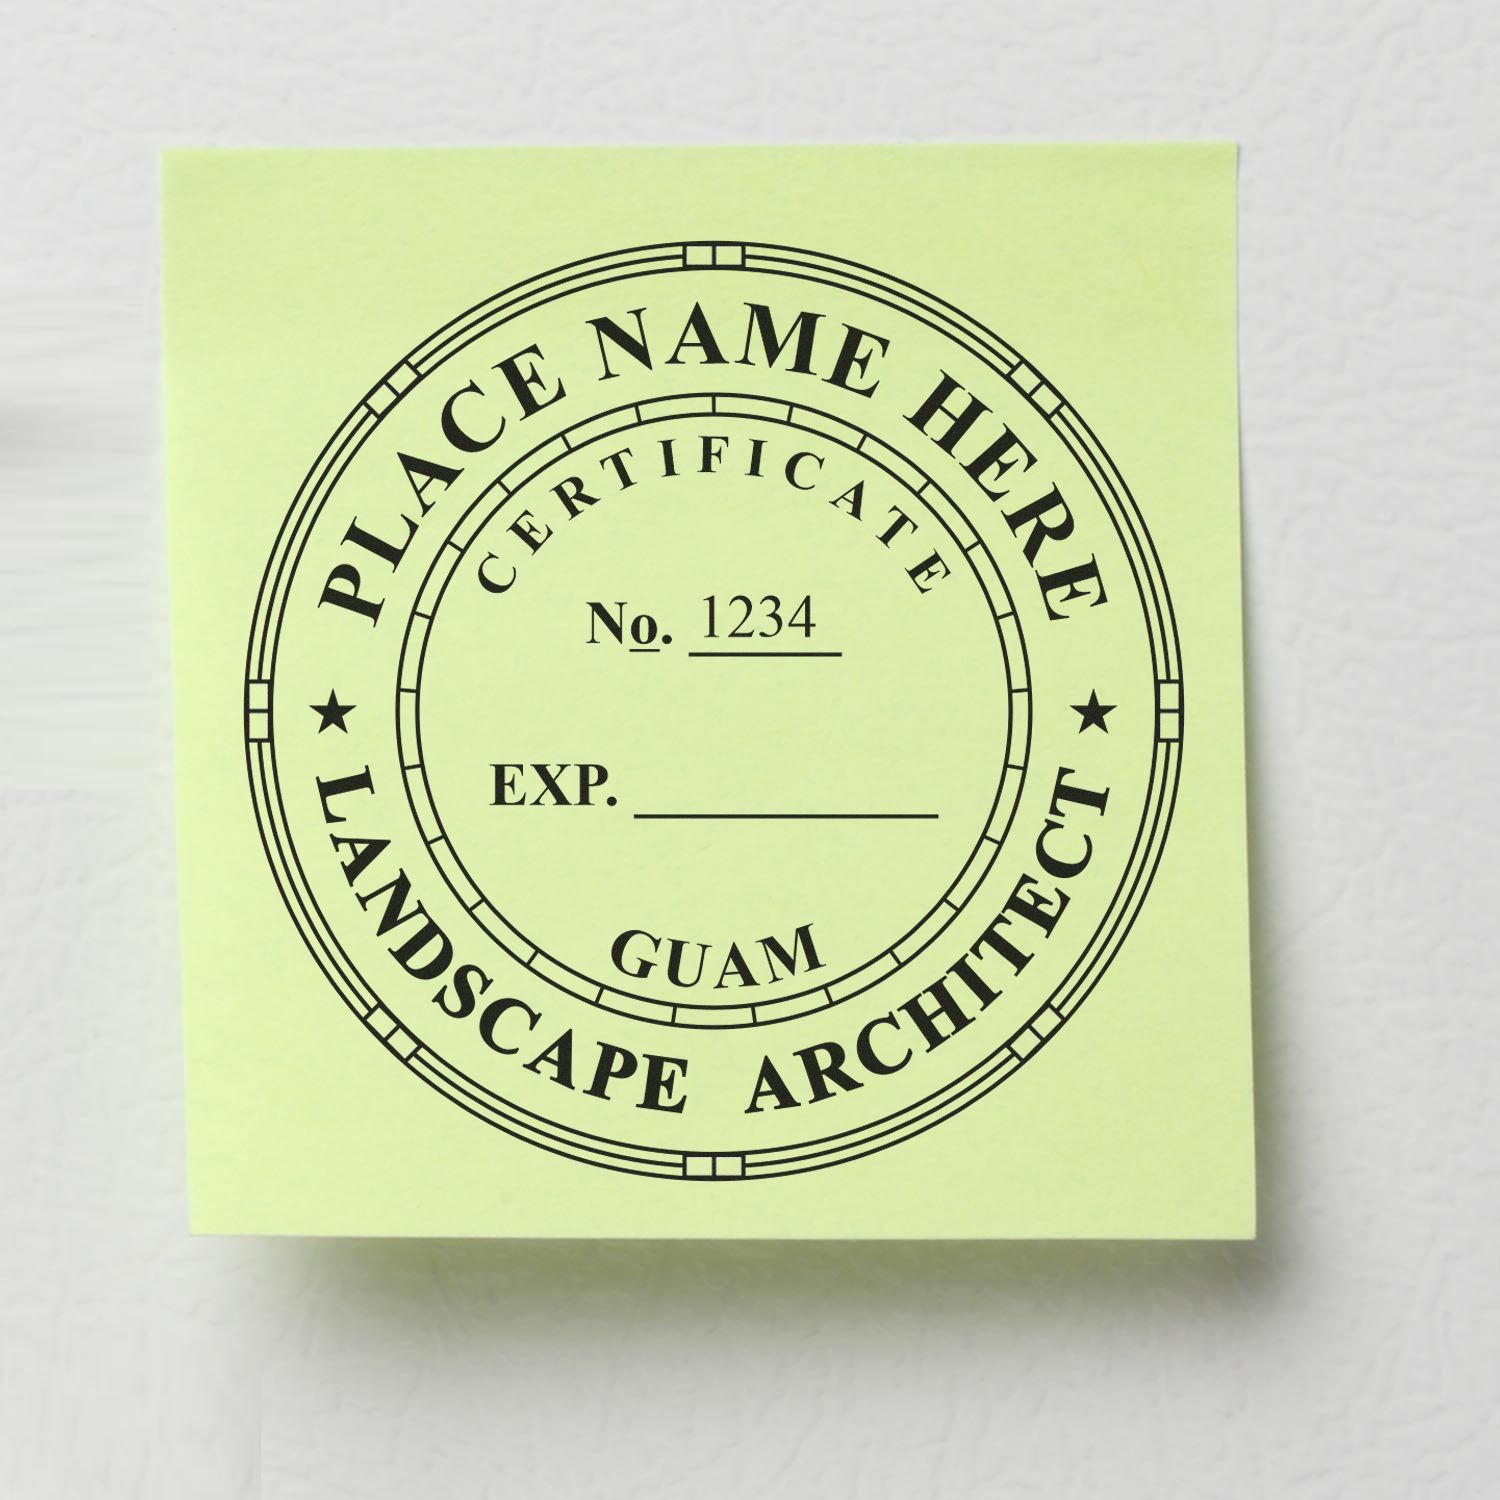 The main image for the Digital Guam Landscape Architect Stamp depicting a sample of the imprint and electronic files